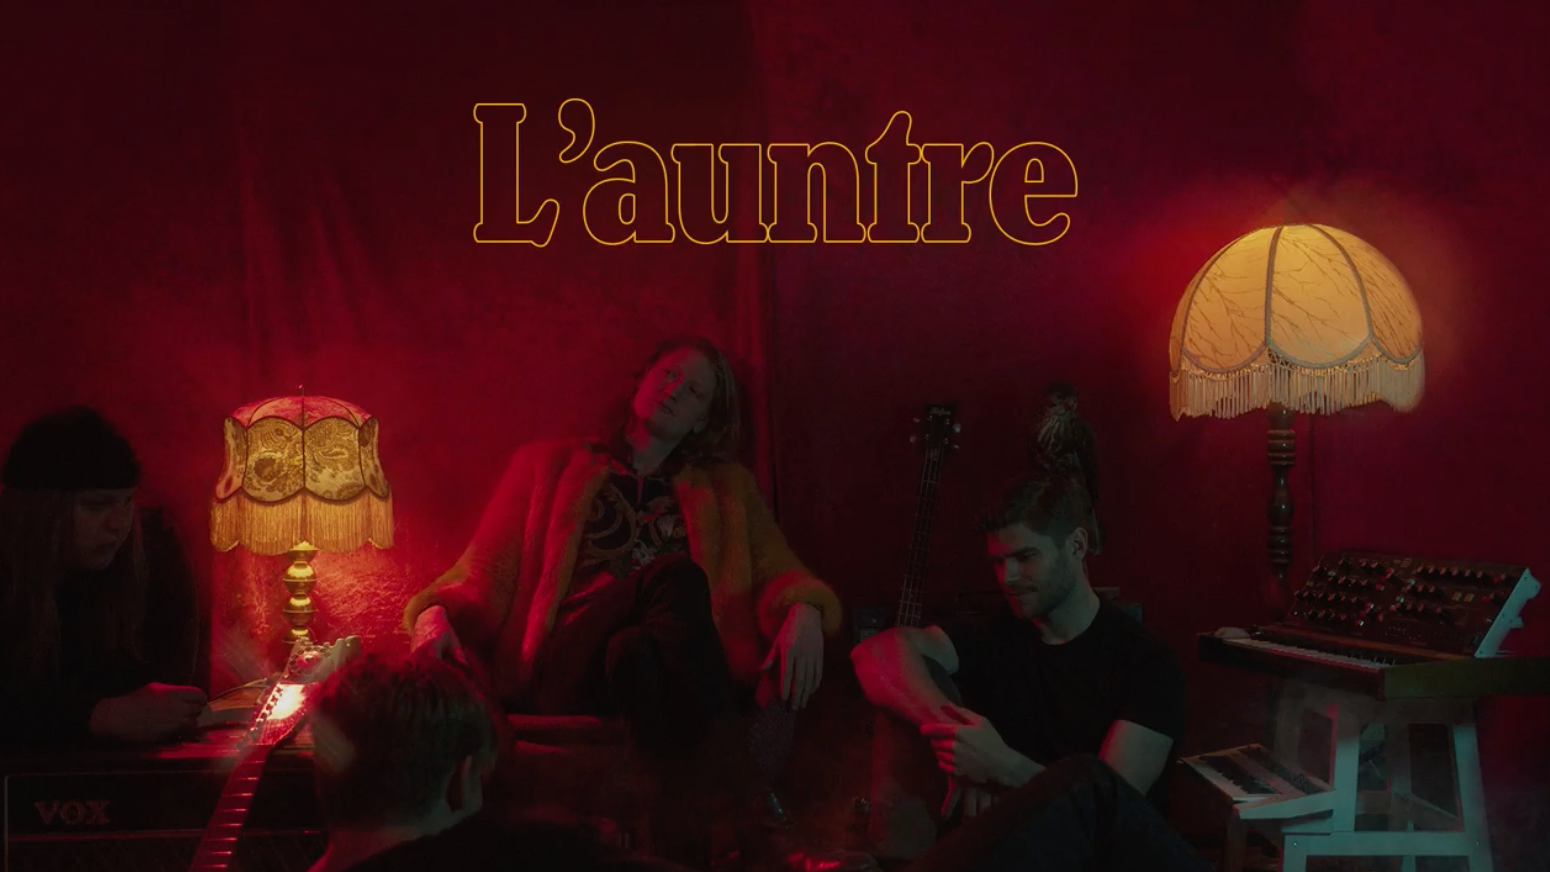 The Mermaids have made their sensual synthwave debut with ‘L'auntre’.